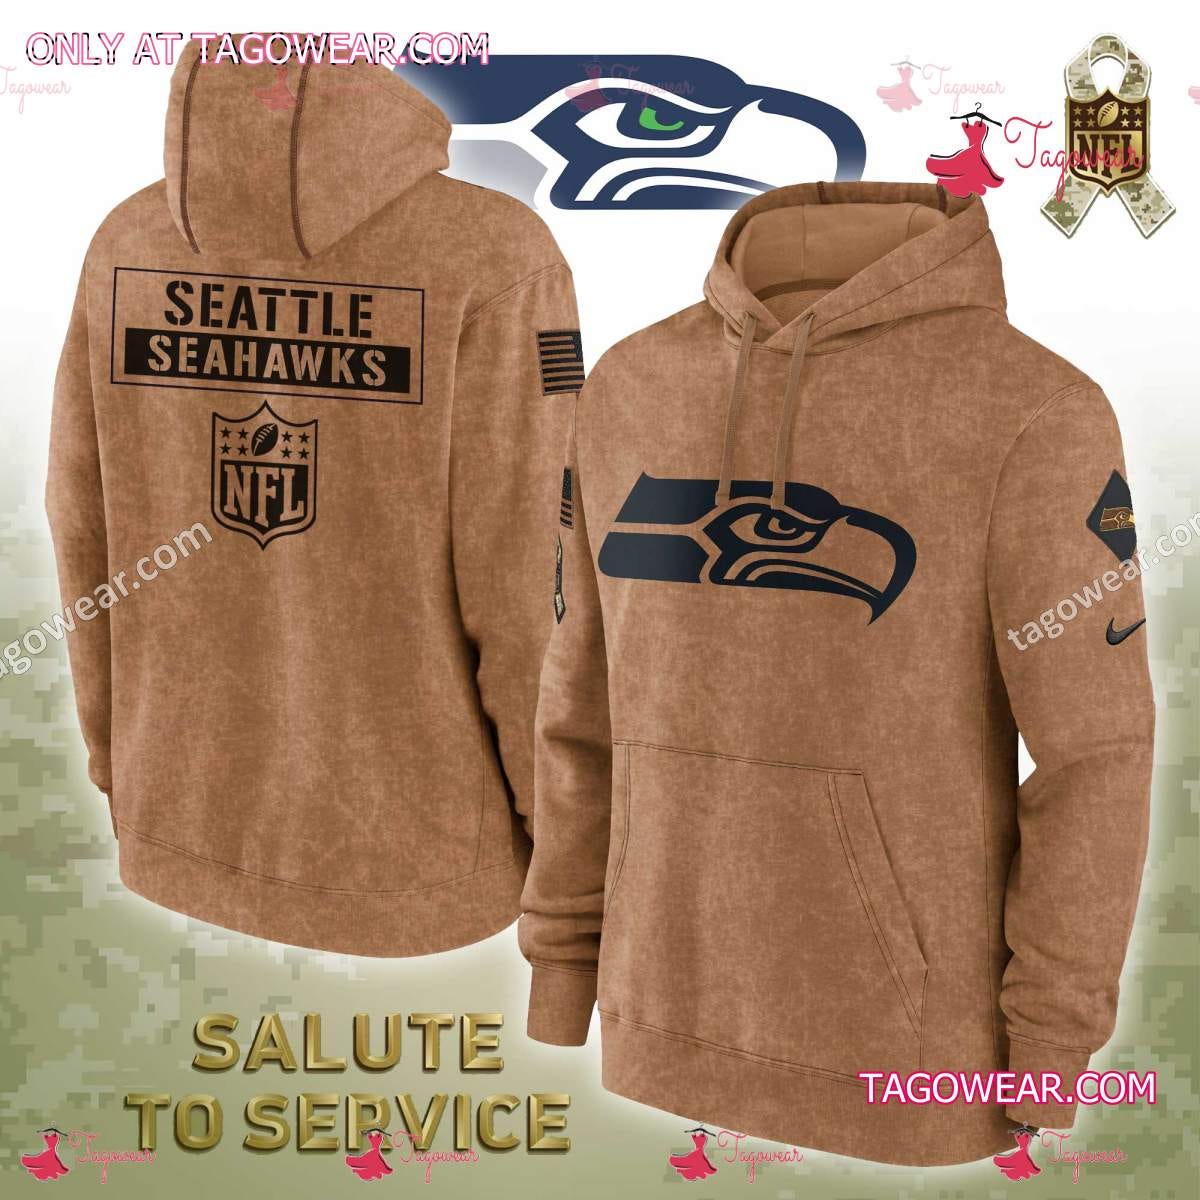 Seattle Seahawks NFL Veterans Salute to Service Hoodie: Show Your Support  and Appreciation for Veterans with Style, by Shop Tagowear